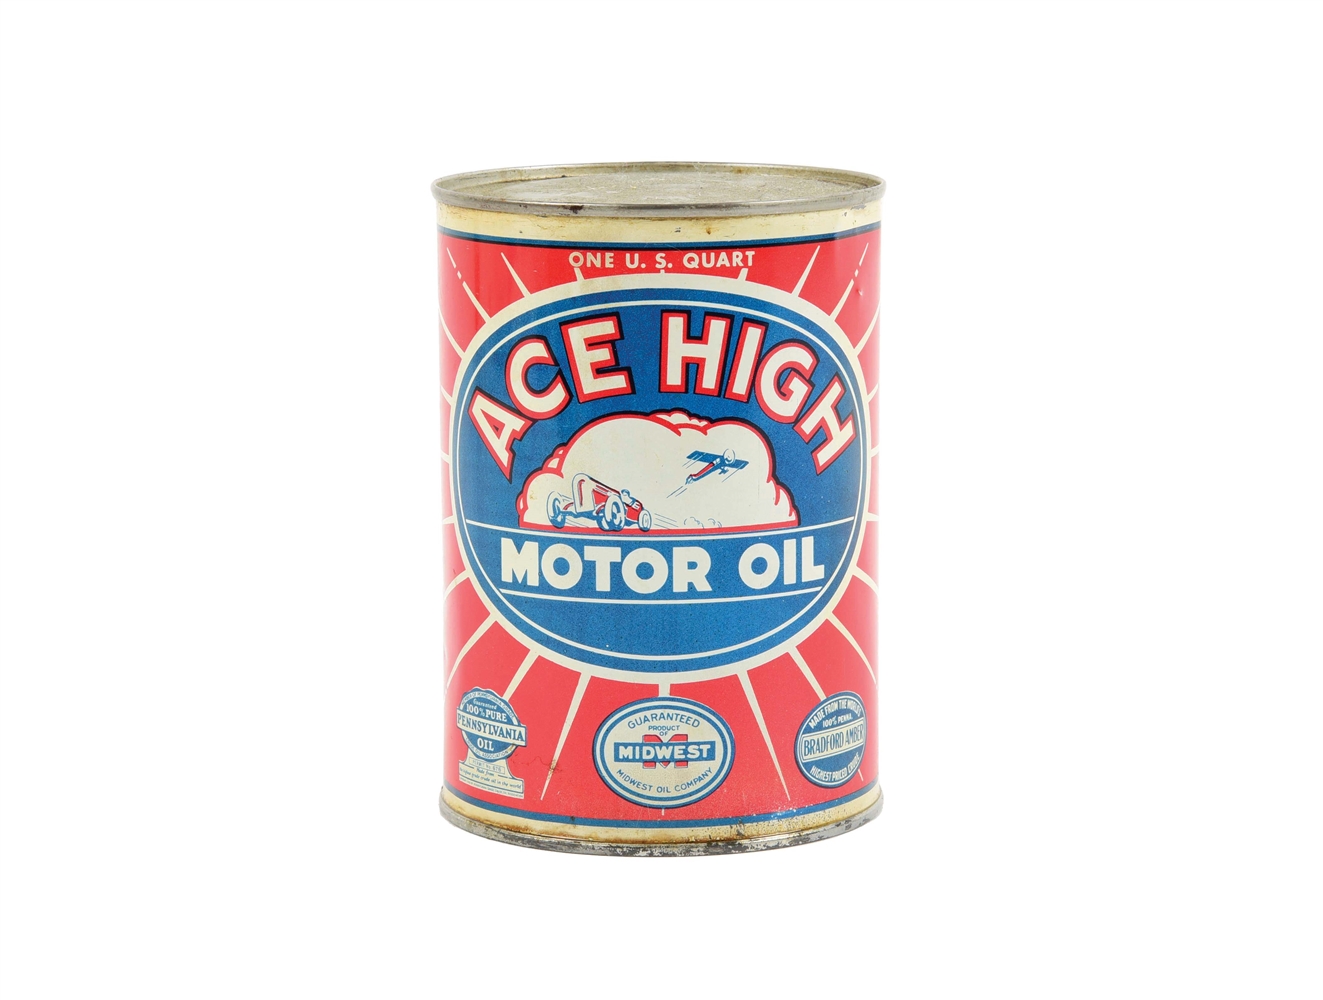 RARE ACE HIGH MOTOR OIL ONE QUART CAN W/ CAR & AIRPLANE GRAPHIC. 